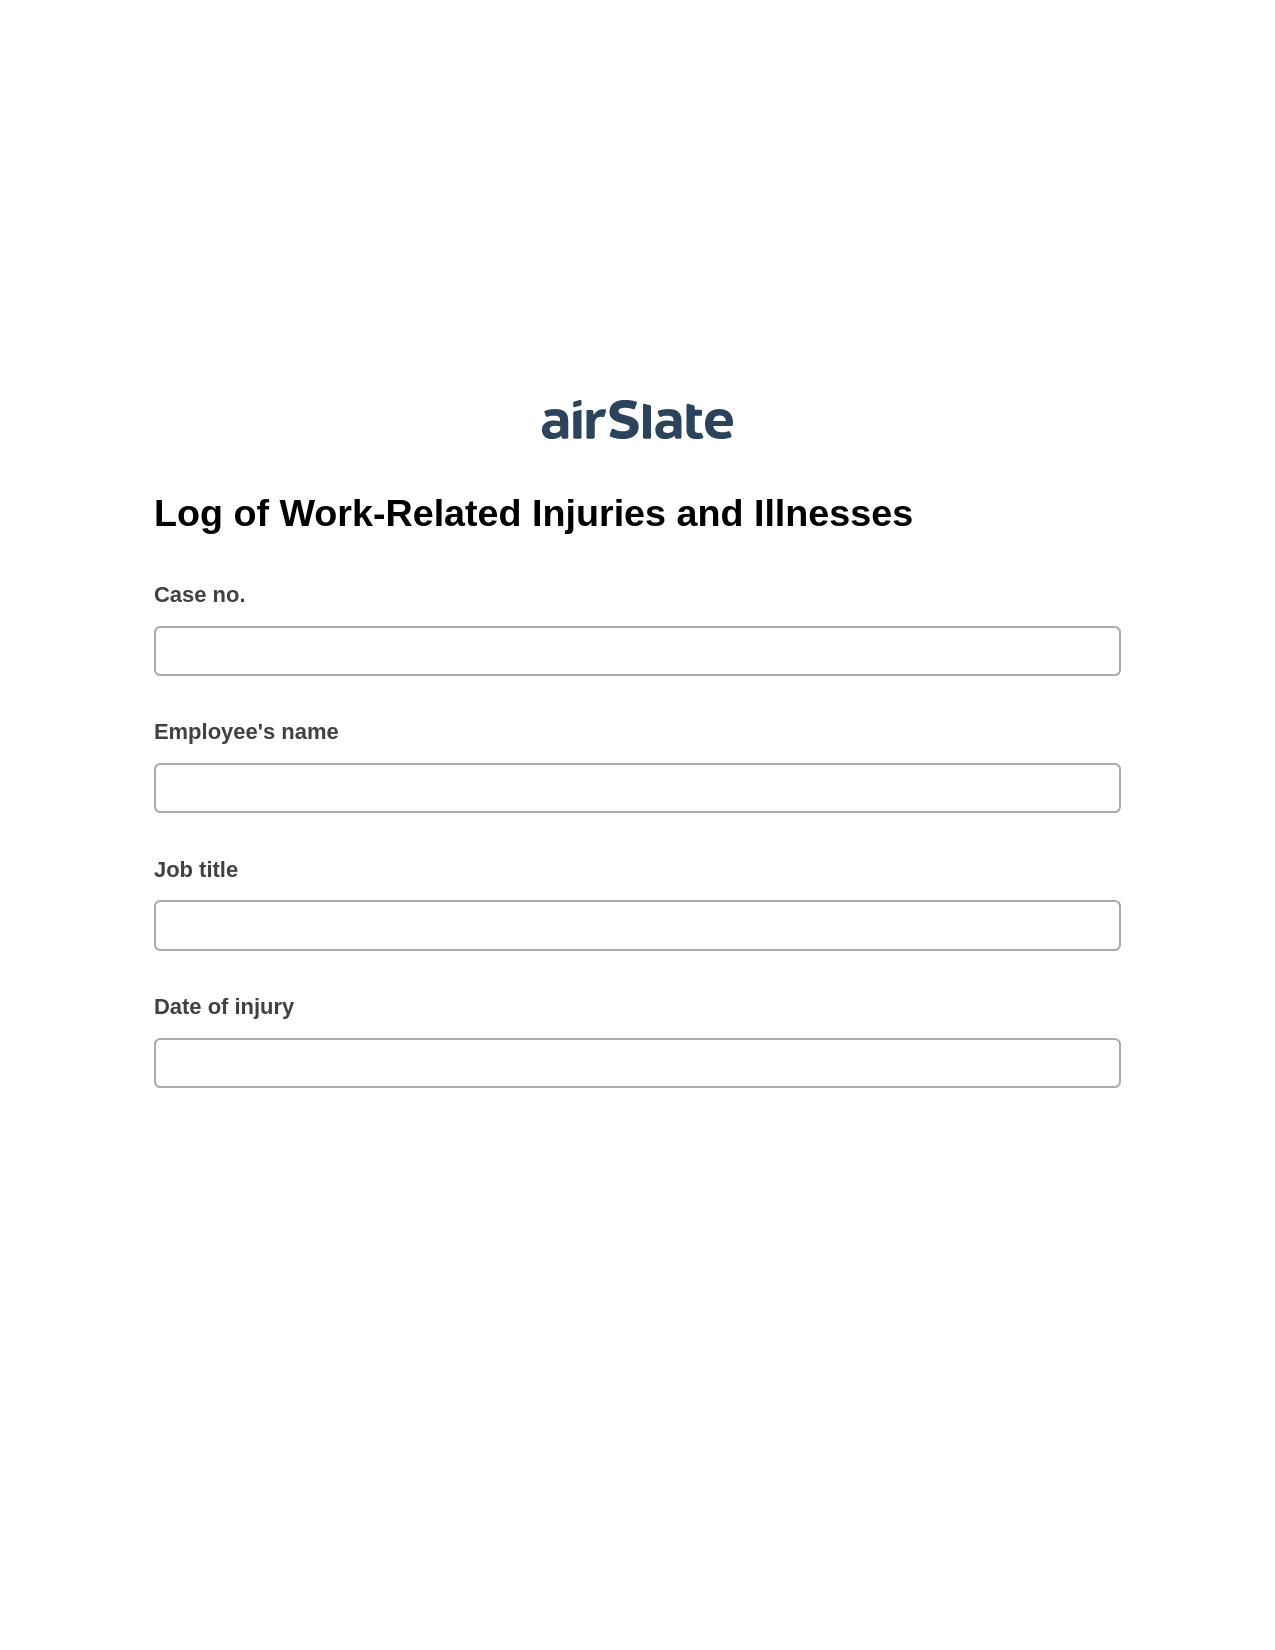 Log of Work-Related Injuries and Illnesses Pre-fill Dropdown from Airtable, Invoke Salesforce Process Bot, Slack Two-Way Binding Bot